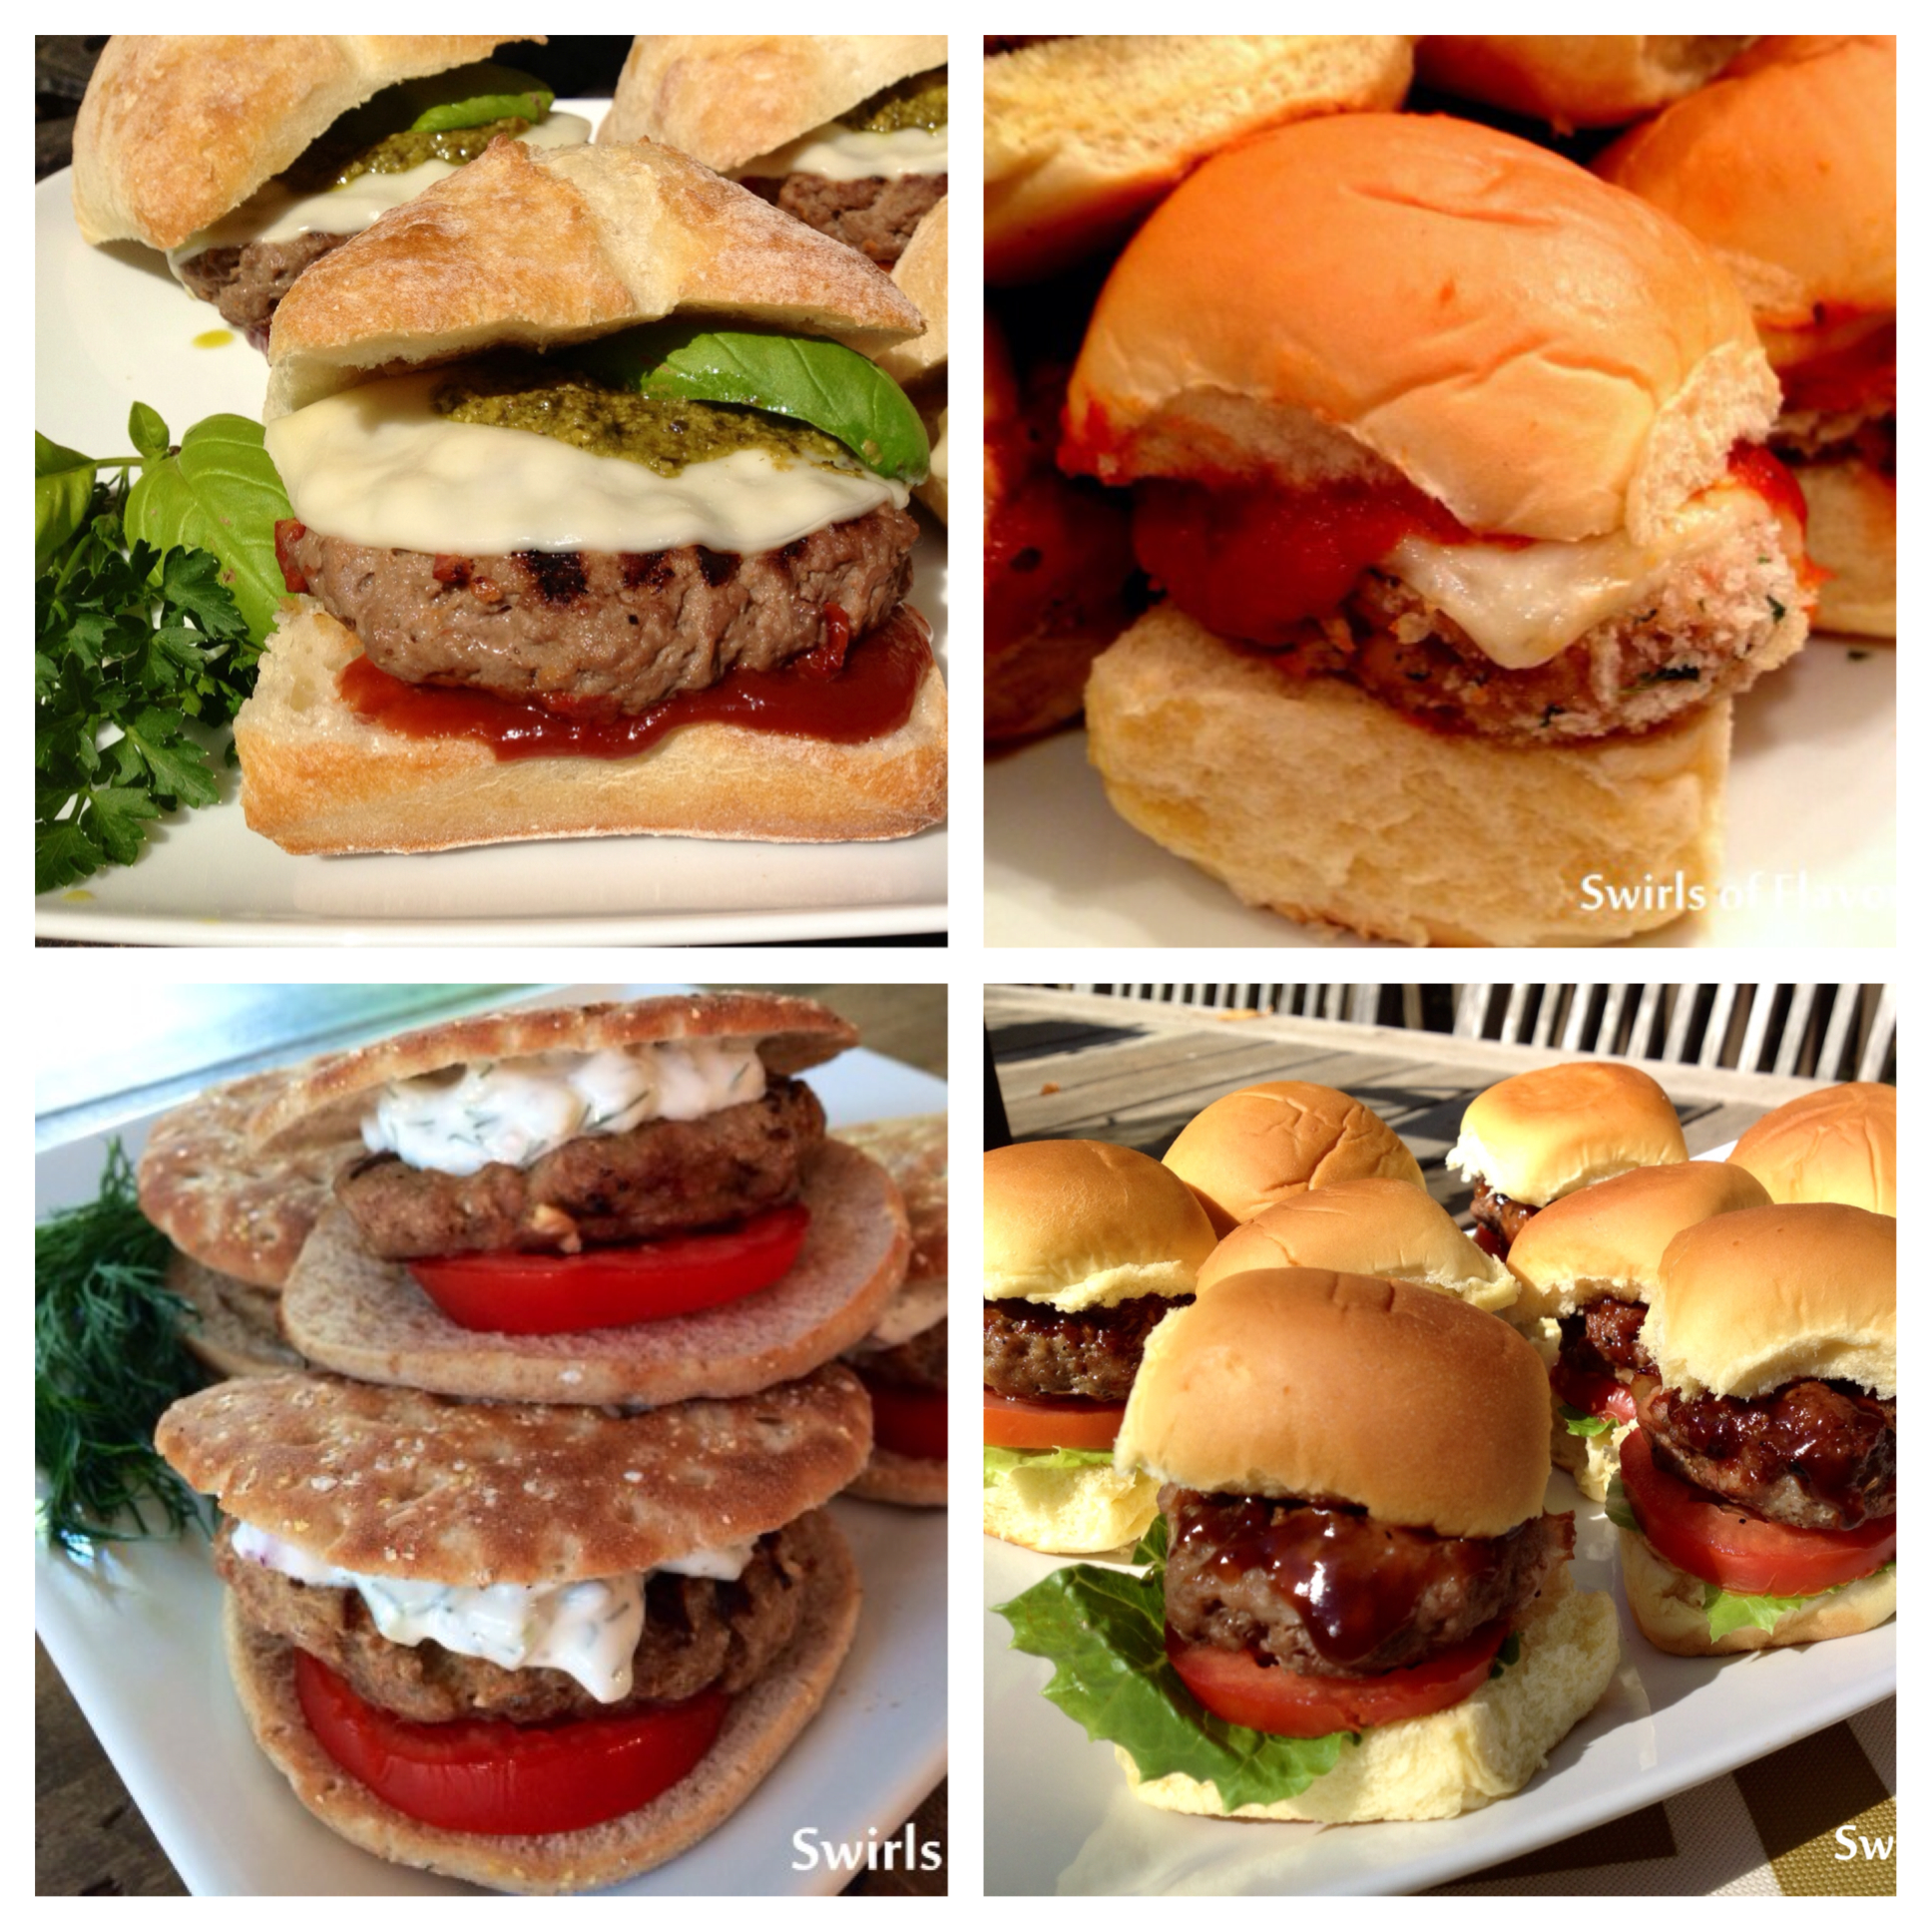 Time to change it up from grilling up just a plain burger? Look no further for delicious twists on the beloved hamburger. Chicken Parmesan Sliders, Bourbon Bacon Sliders, Turkey Burgers With Tzatziki Sauce and Pesto Provolone Burgers will be the hit at your next barbecue! burgers | turkey burgers | sliders | chicken burgers | cheese | grilling | barbecue